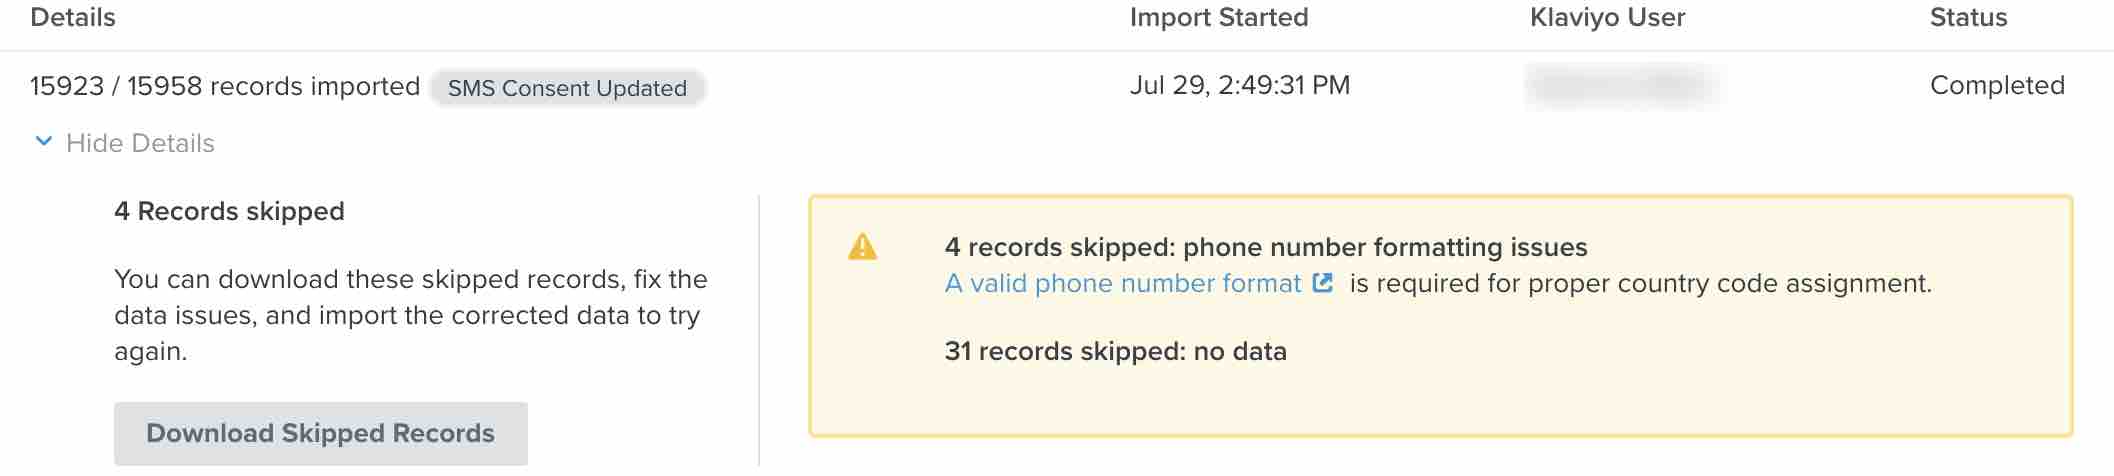 Import details with yellow callout showing 4 records skipped